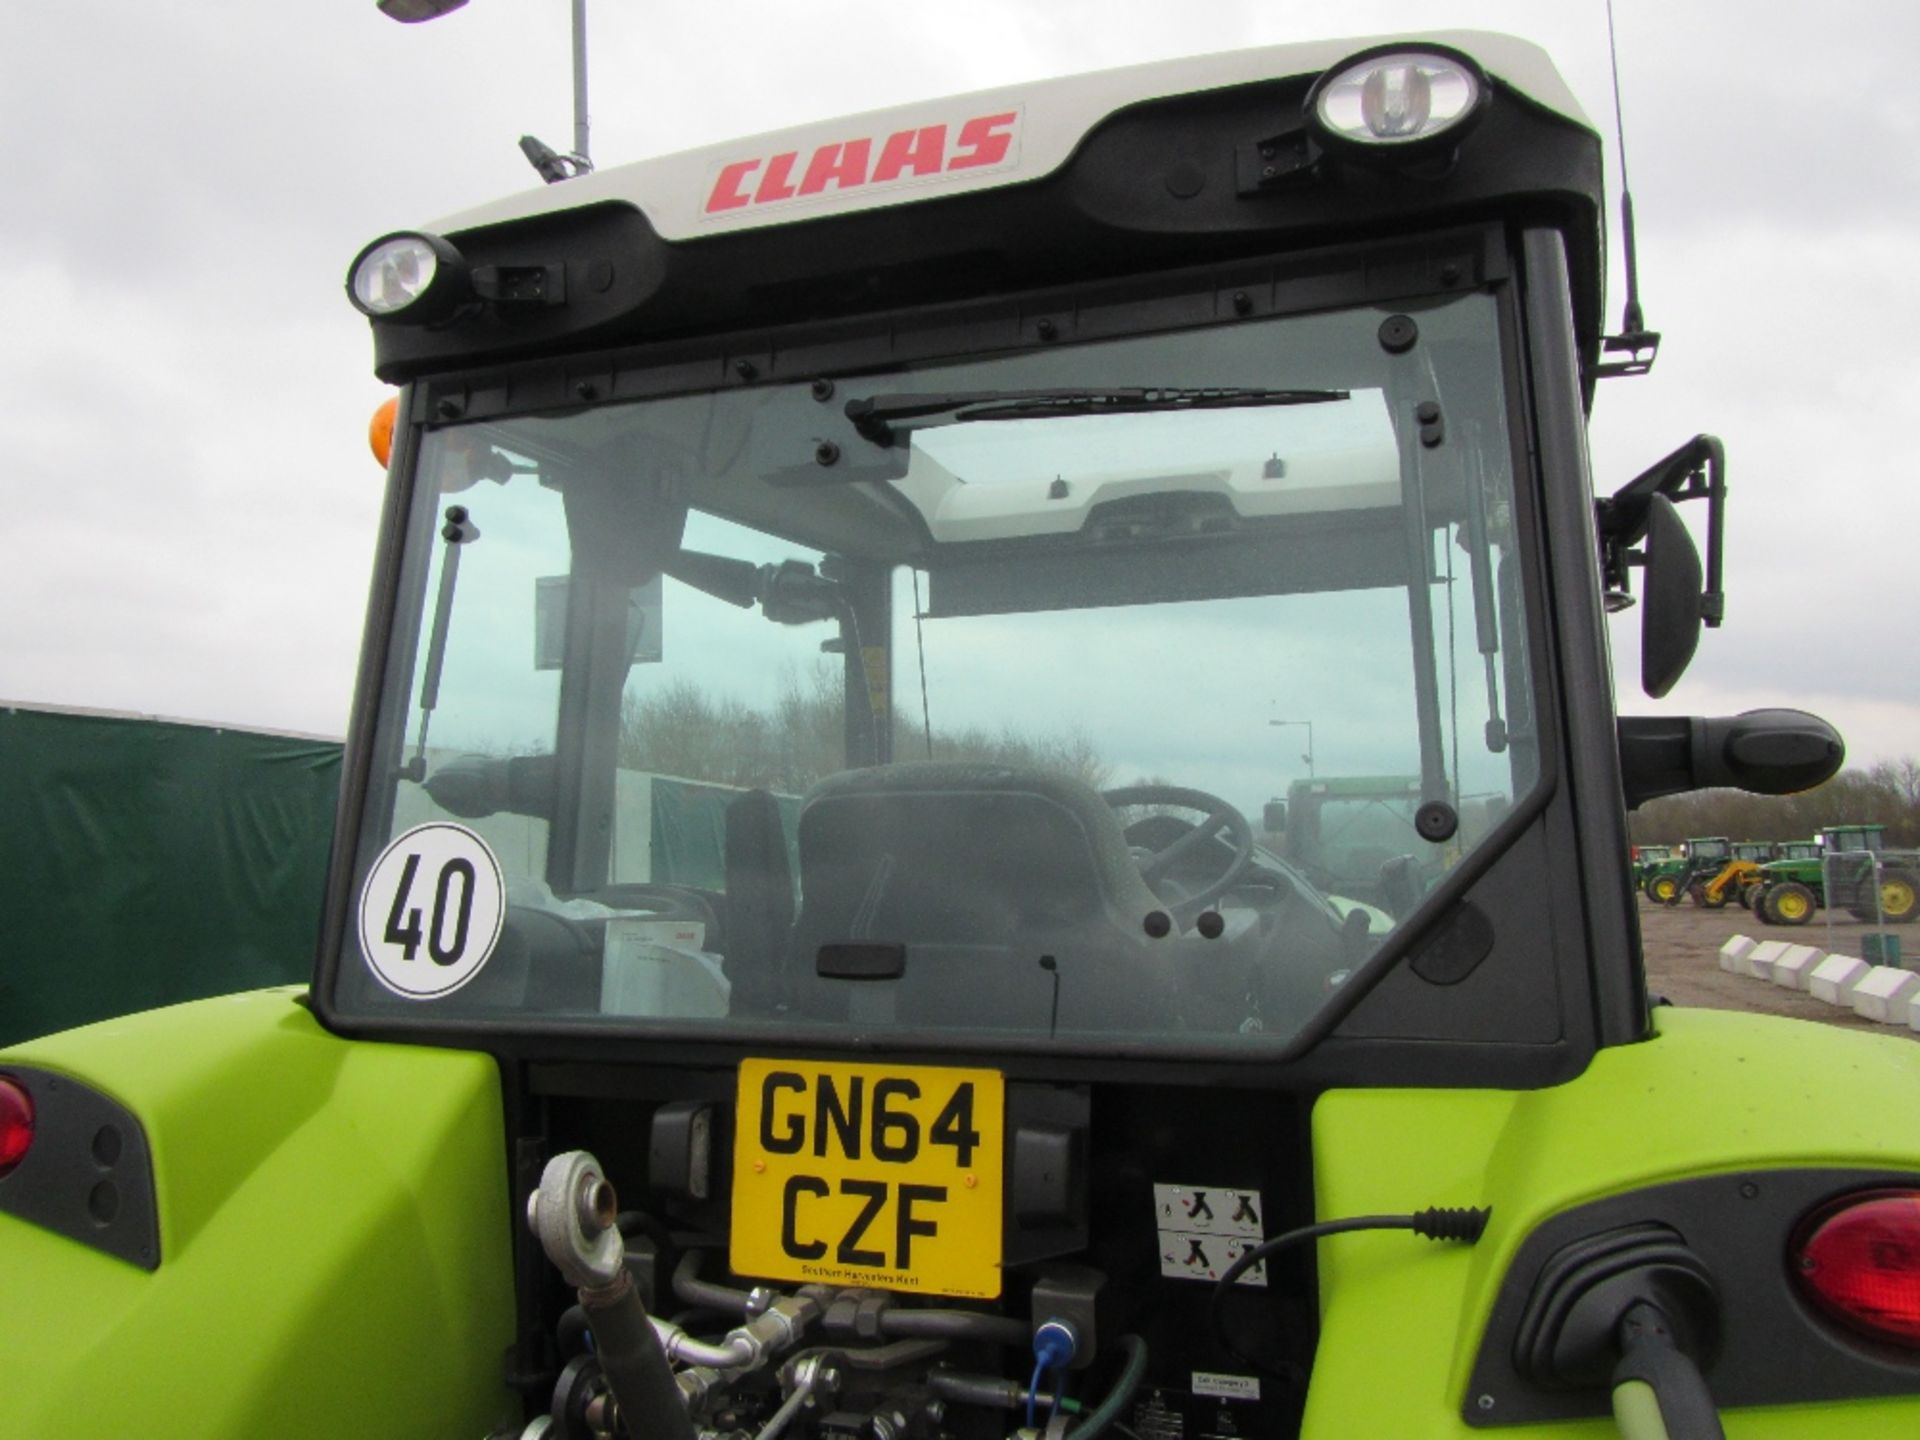 2014 Claas Axos 340C Tractor c/w Loader 500 Hrs Reg No GN64 CZF Ser No 2220597 - Image 8 of 17